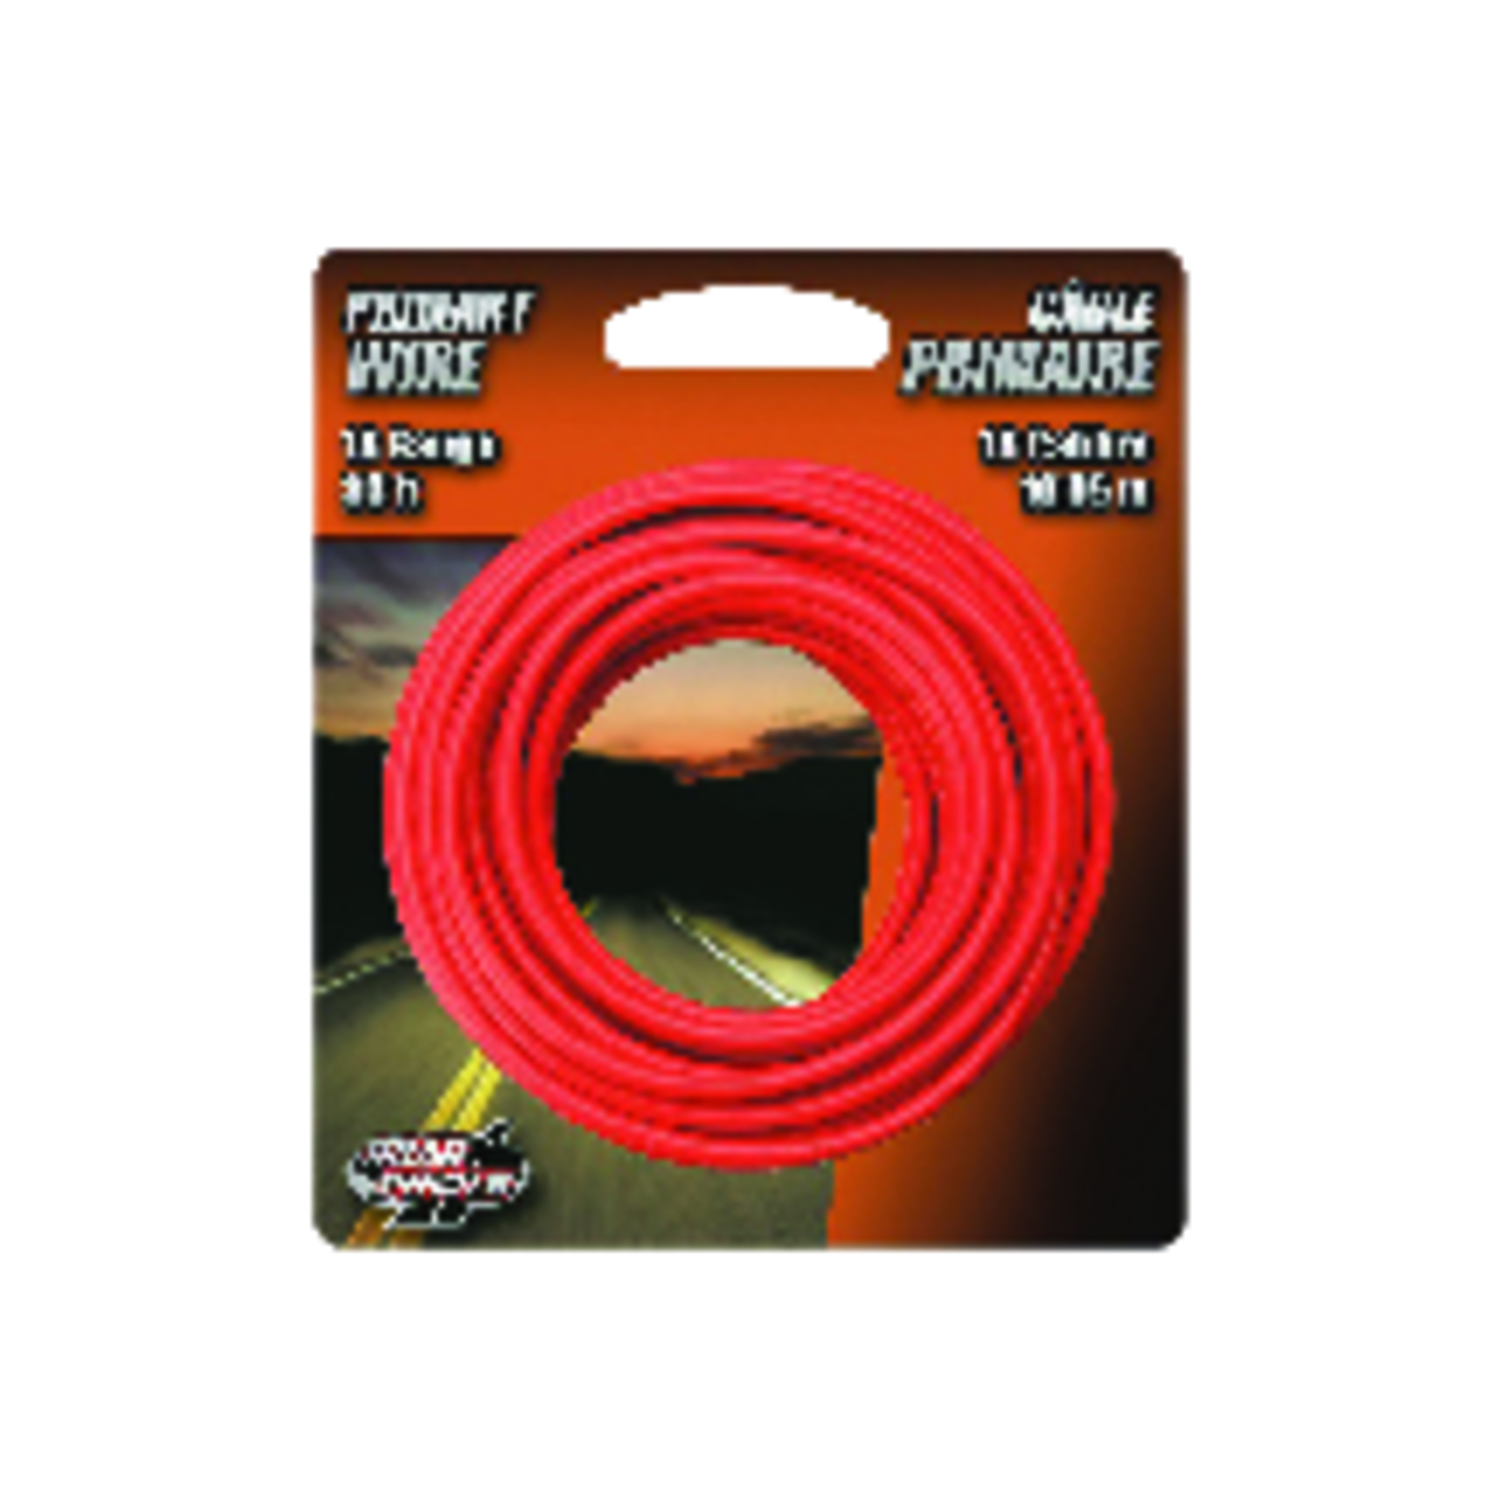 Coleman Cable 33 ft. 18 Ga. Primary Wire Red